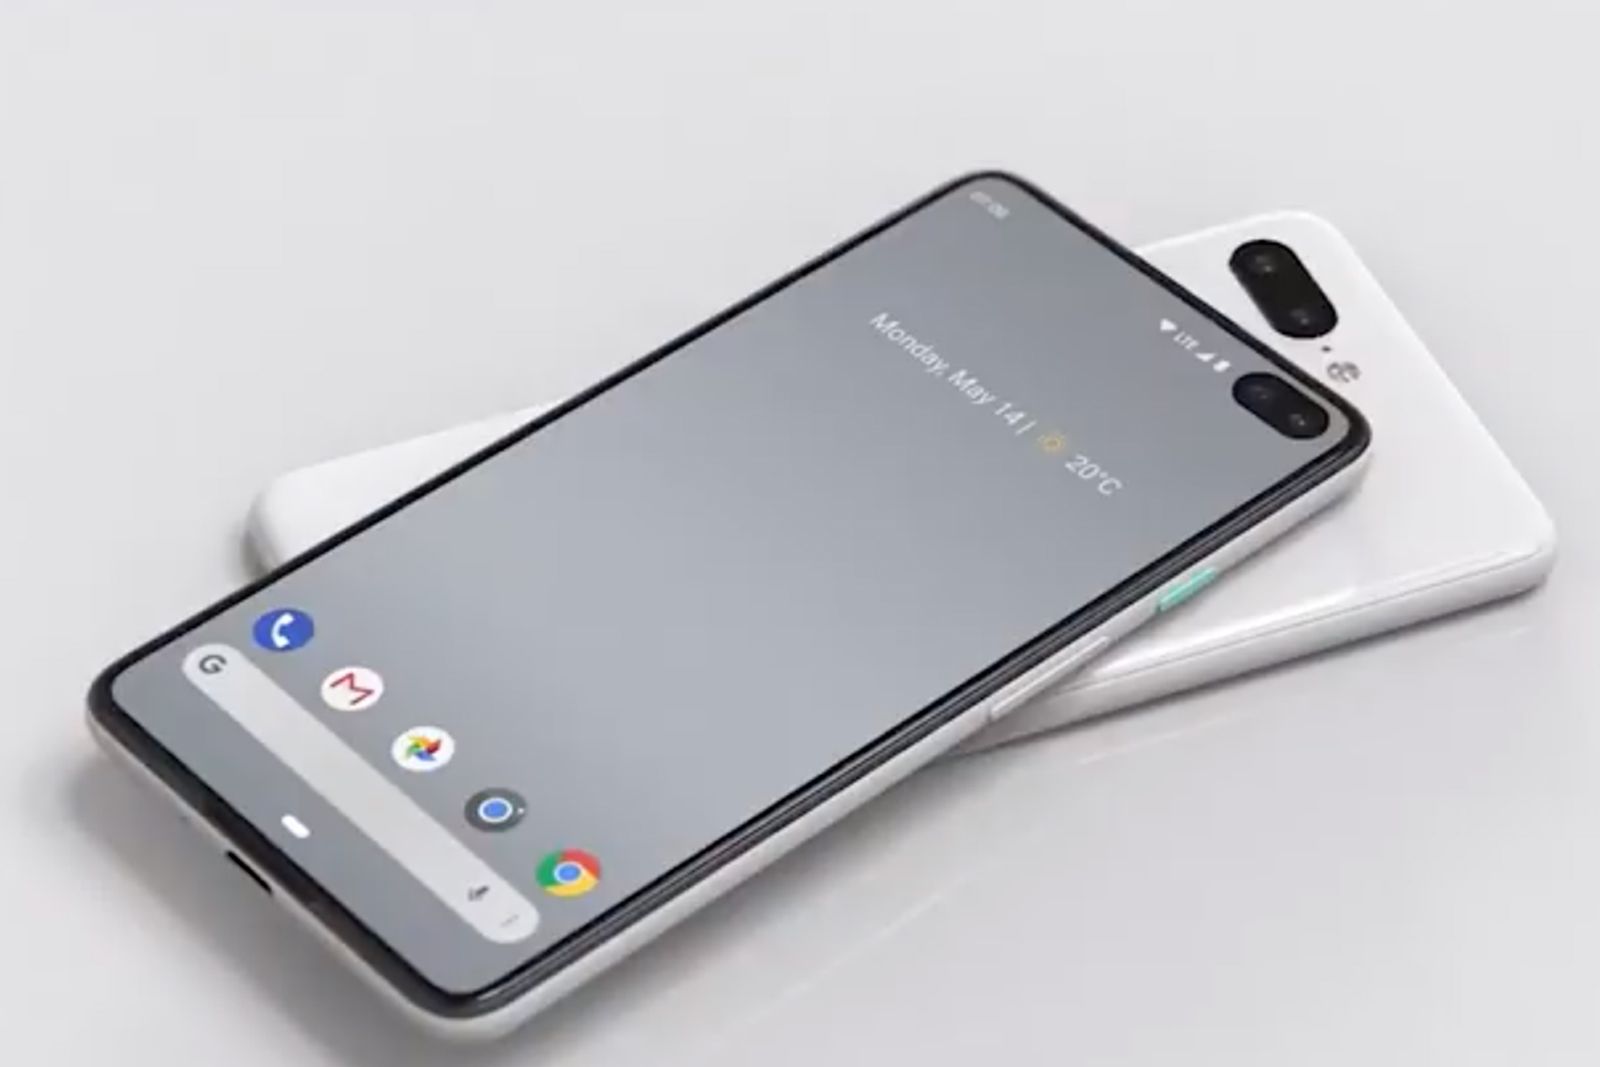 Google Pixel 4 leak suggests no physical buttons and punch hole front camera image 1